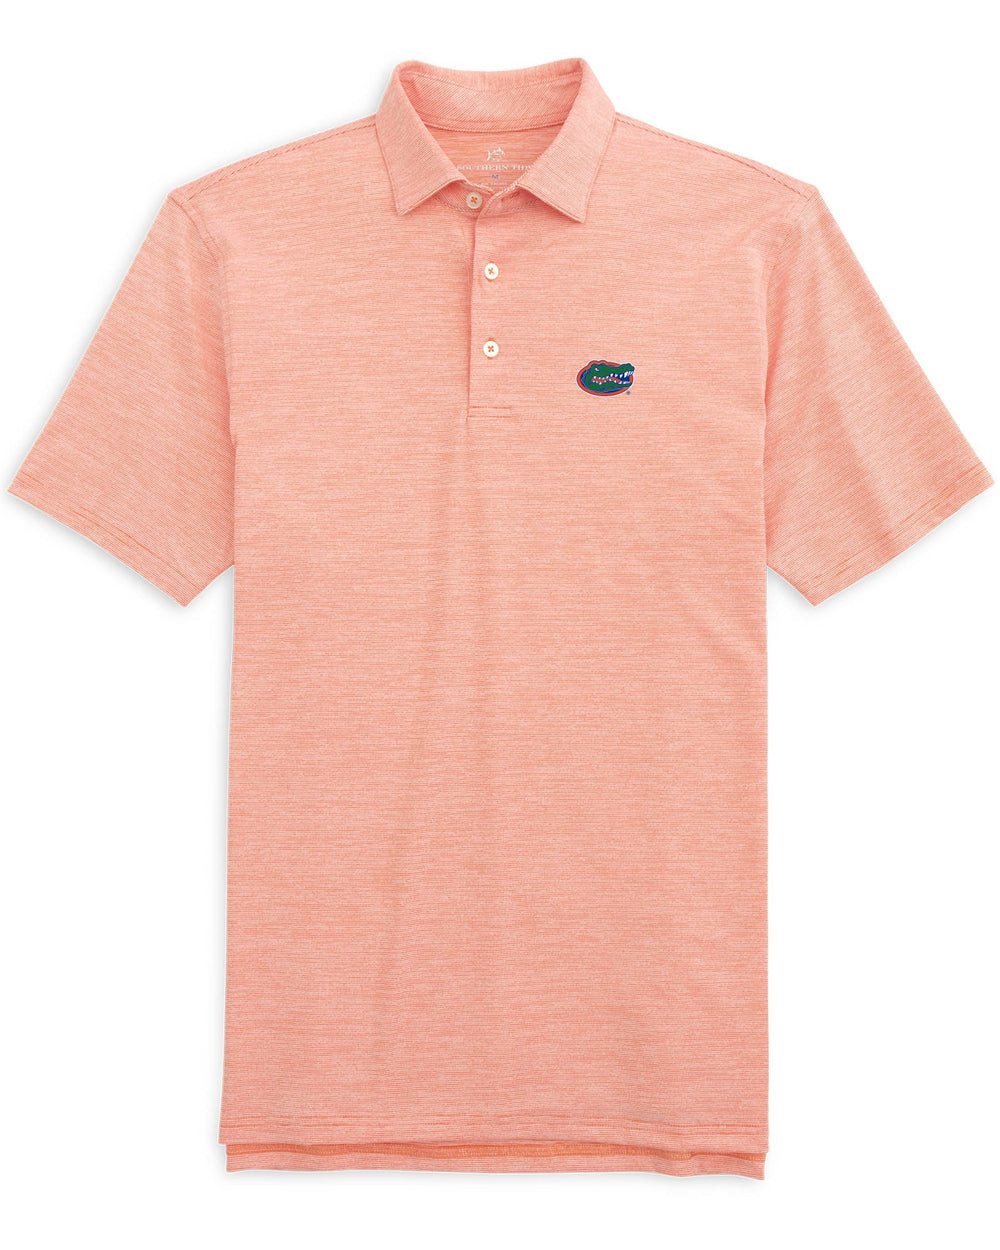 The front view of the Florida Gators Driver Spacedye Polo Shirt by Southern Tide - Endzone Orange